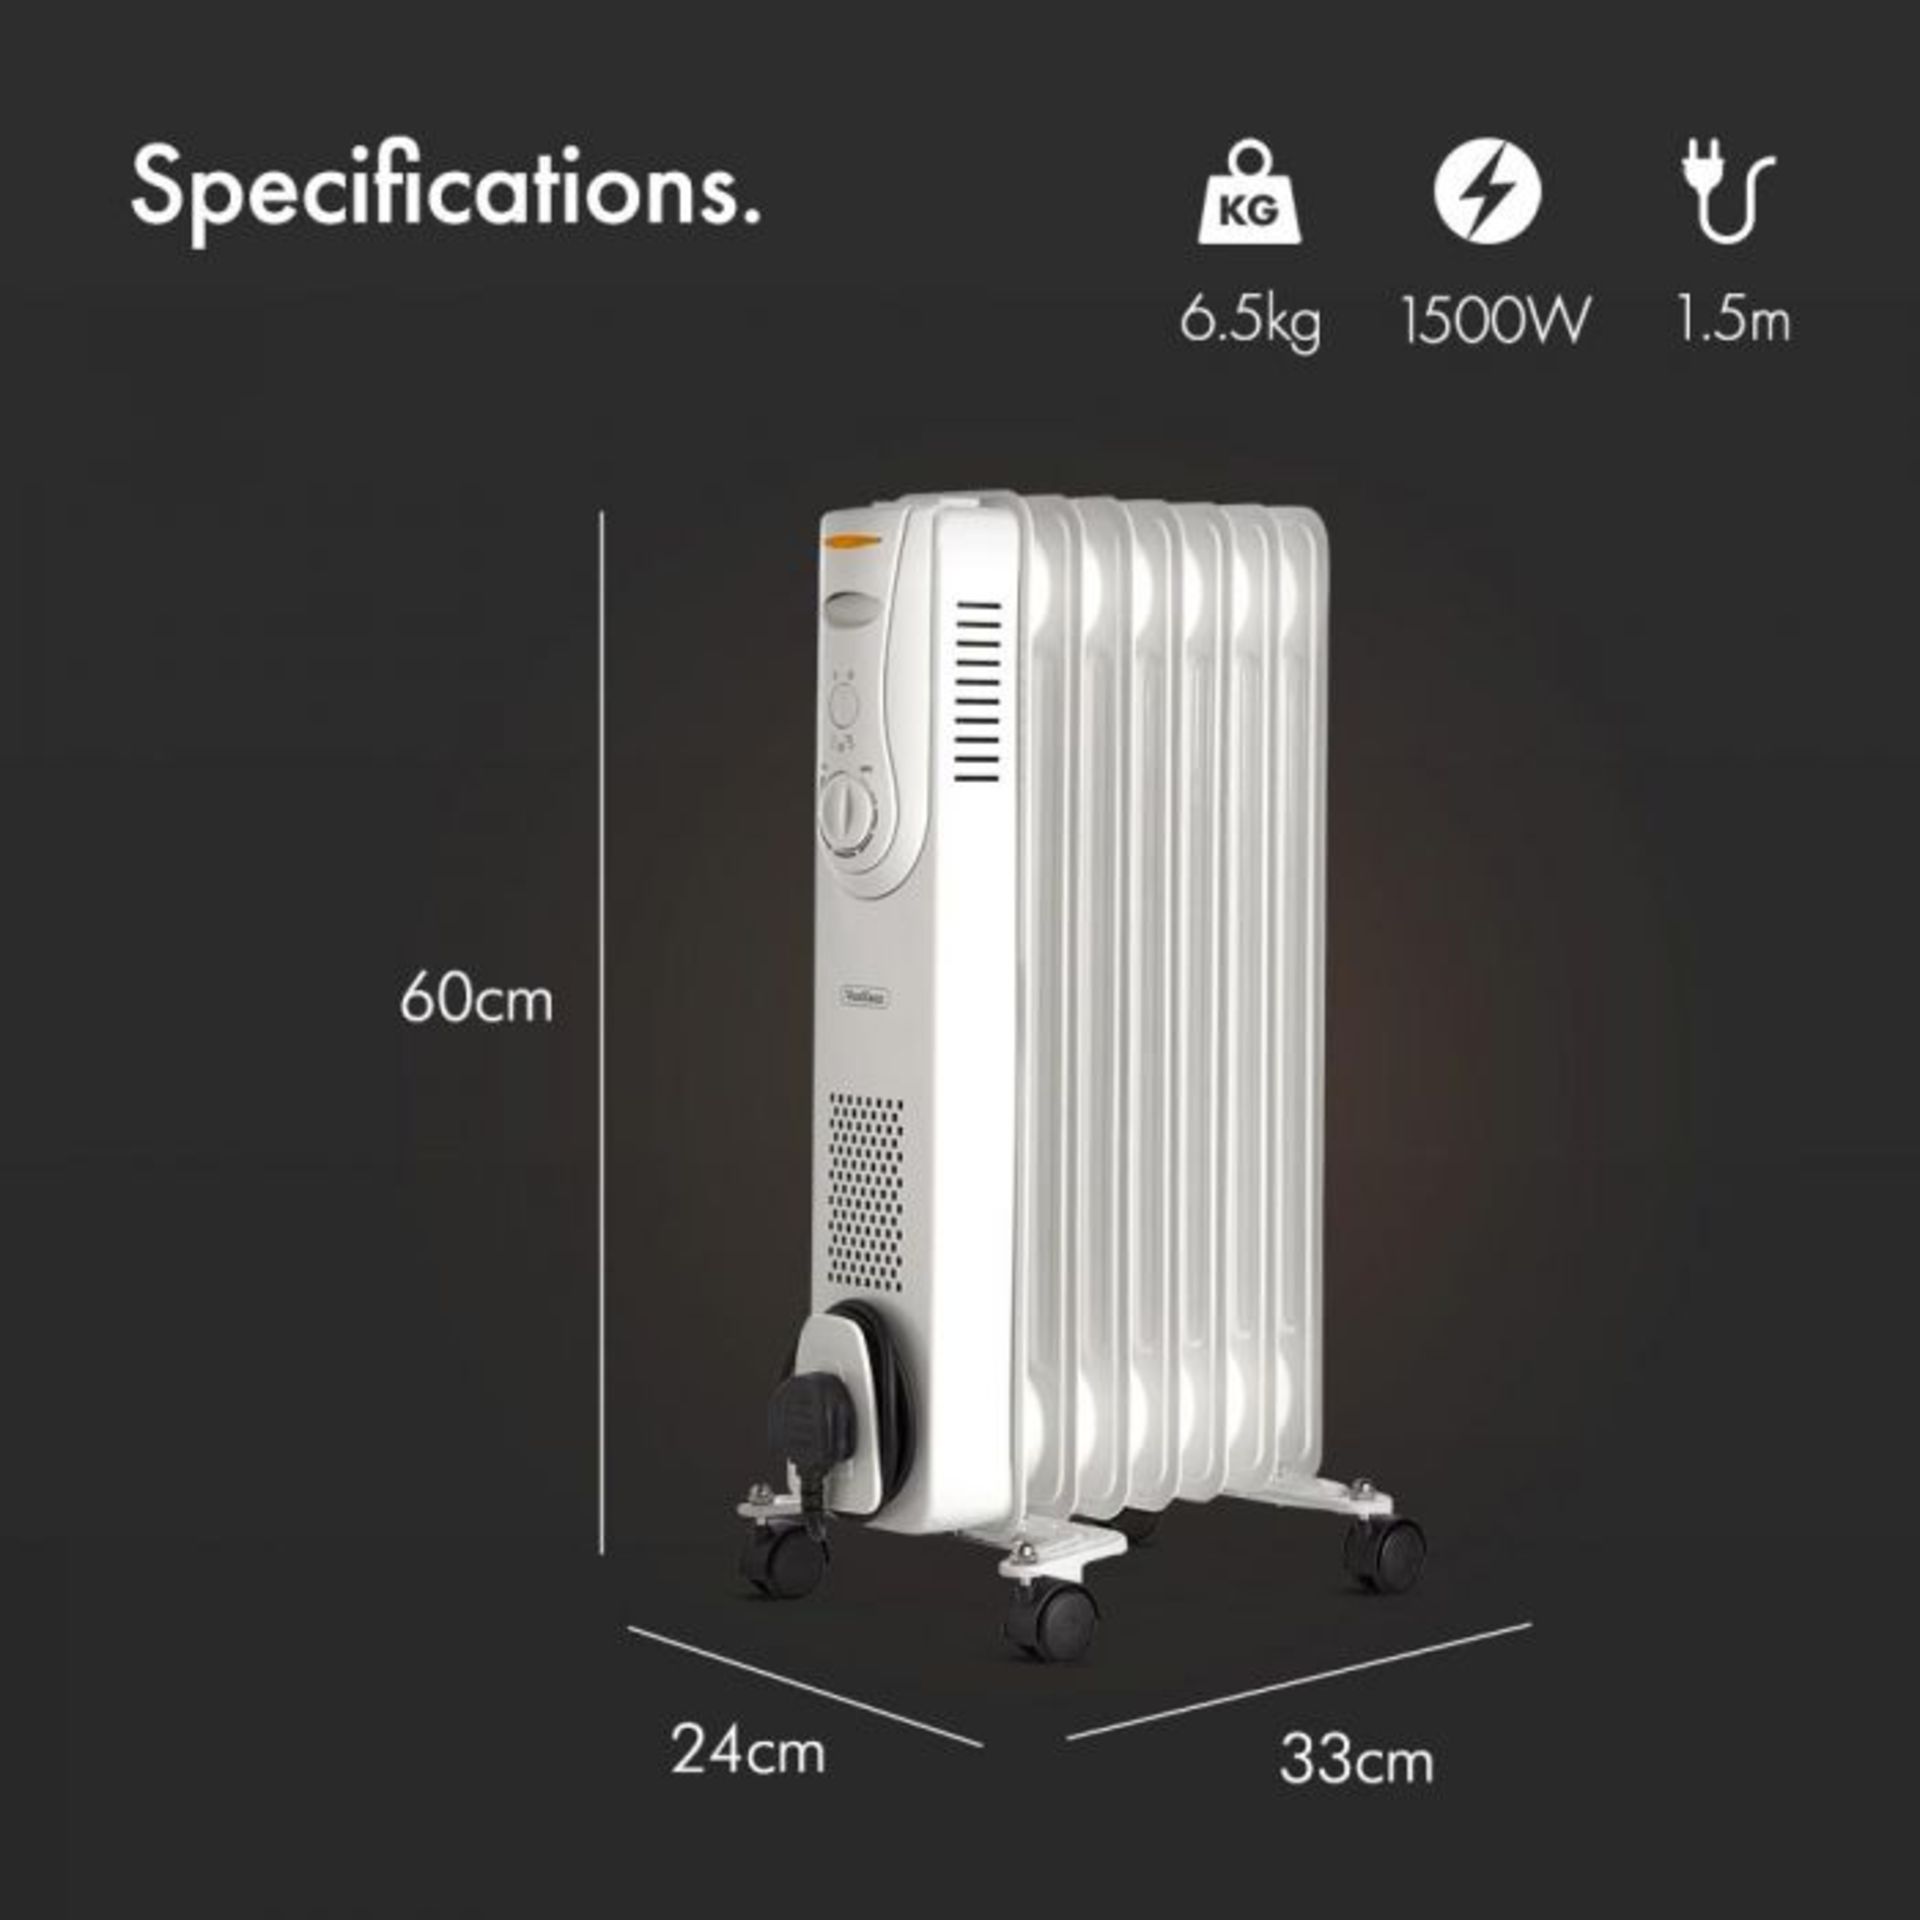 (V159) 7 Fin 1500W Oil Filled Radiator - White Powerful 1500W radiator with 7 oil-filled fins ... - Image 3 of 3